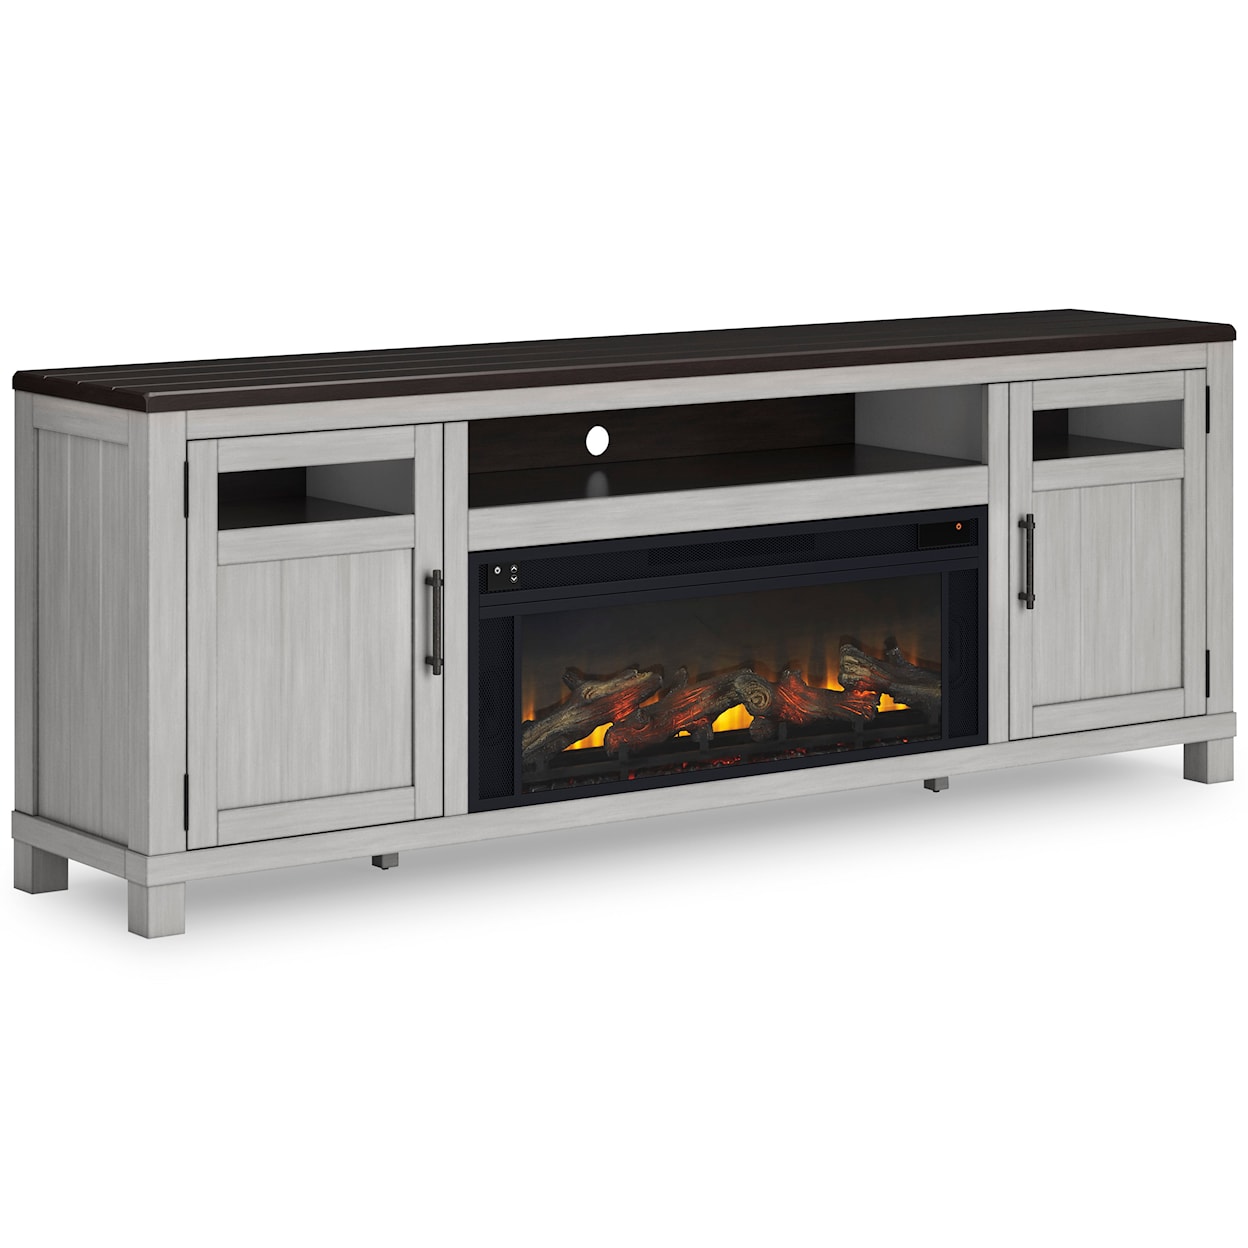 Benchcraft Darborn 88" TV Stand with Electric Fireplace